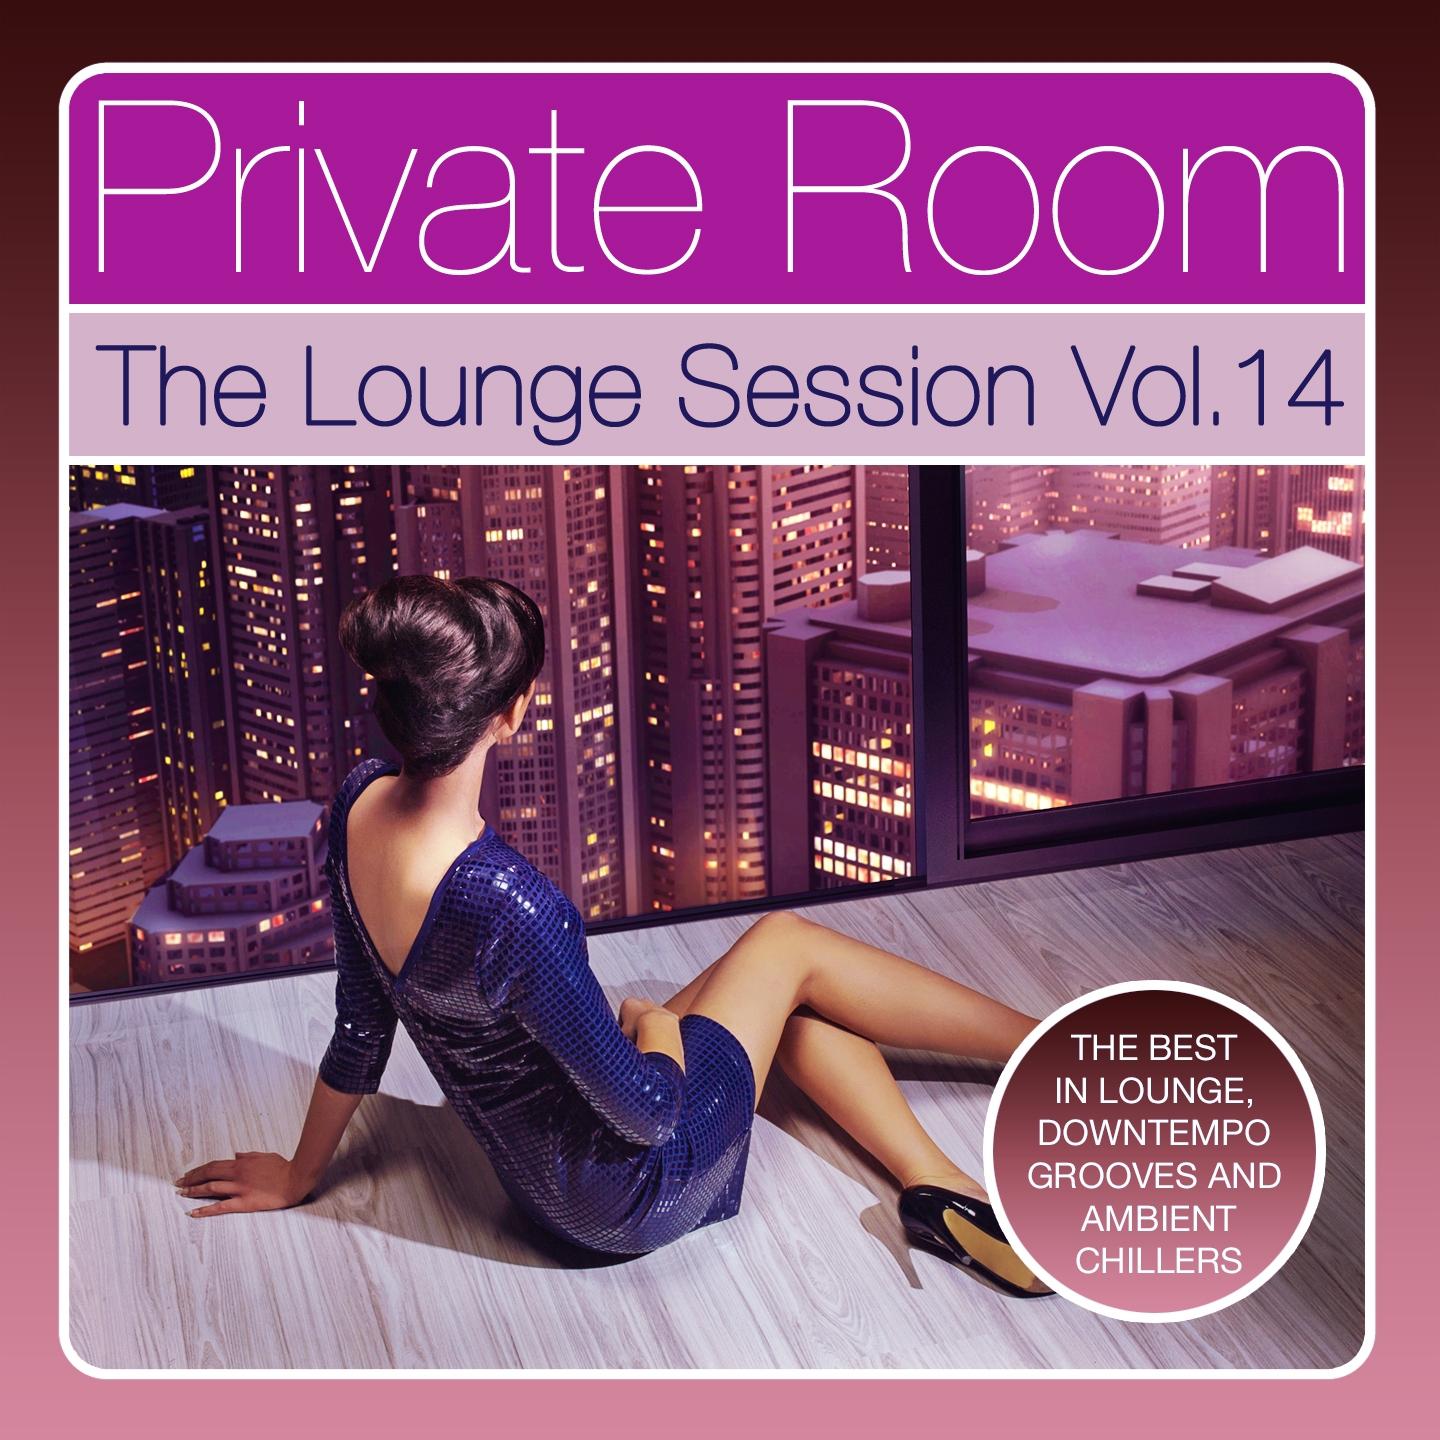 Private Room - The Lounge Session, Vol. 14 (The Best in Lounge, Downtempo Grooves and Ambient Chillers)